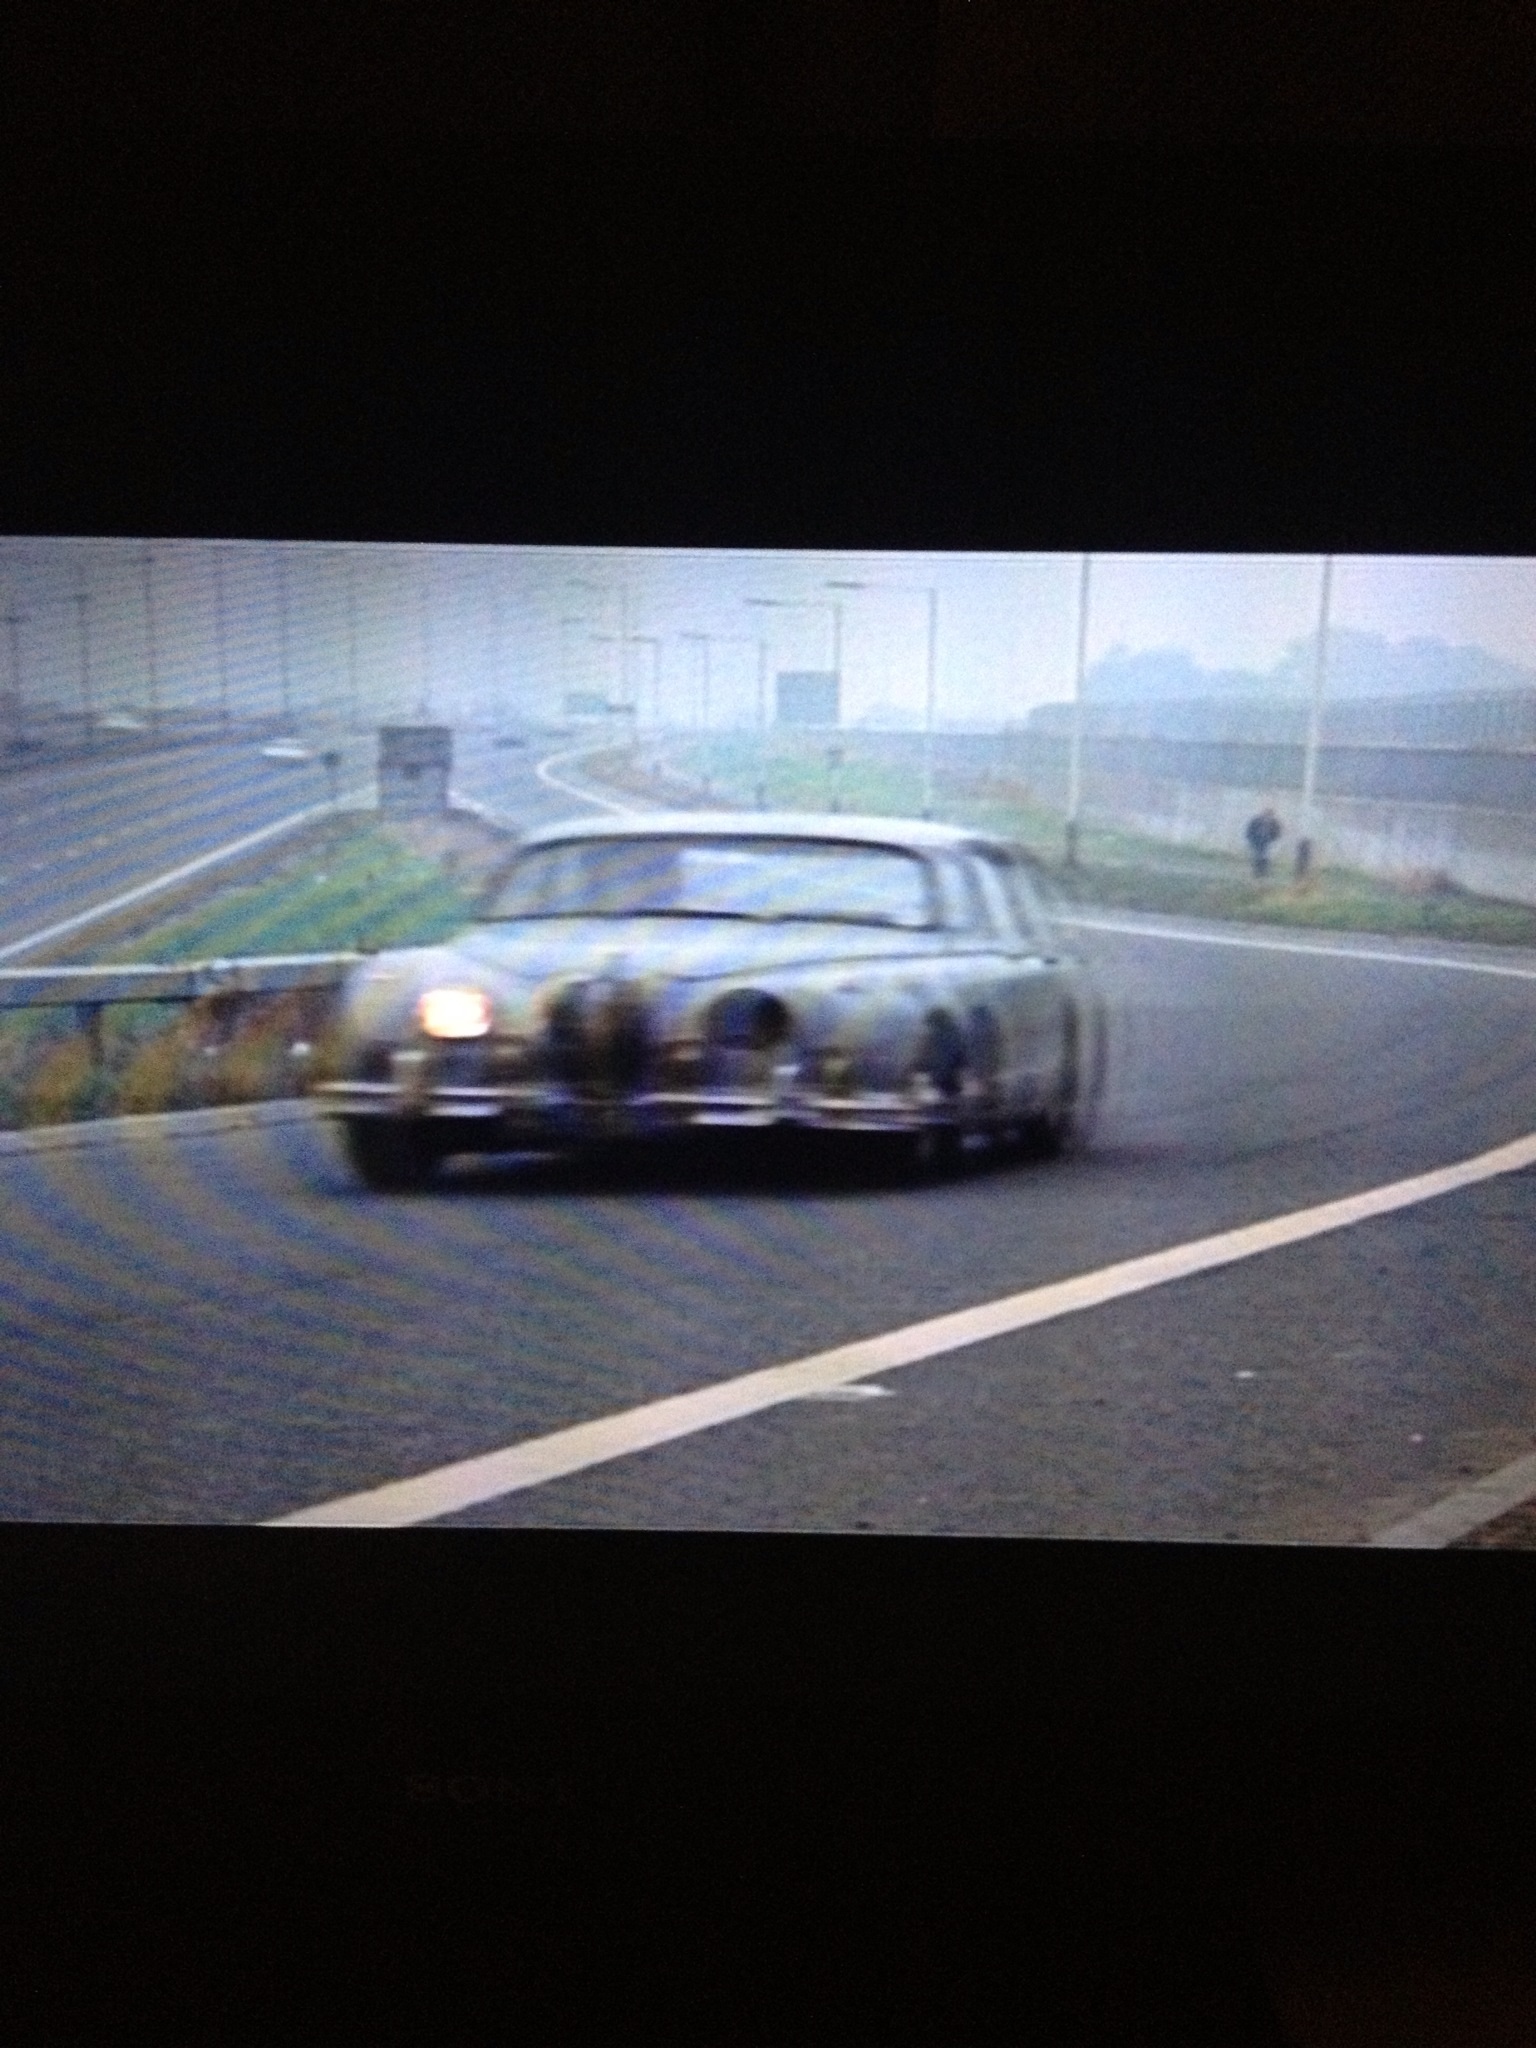 Where's the Withnail and I Jag Mk 2? - Page 1 - Classic Cars and Yesterday's Heroes - PistonHeads